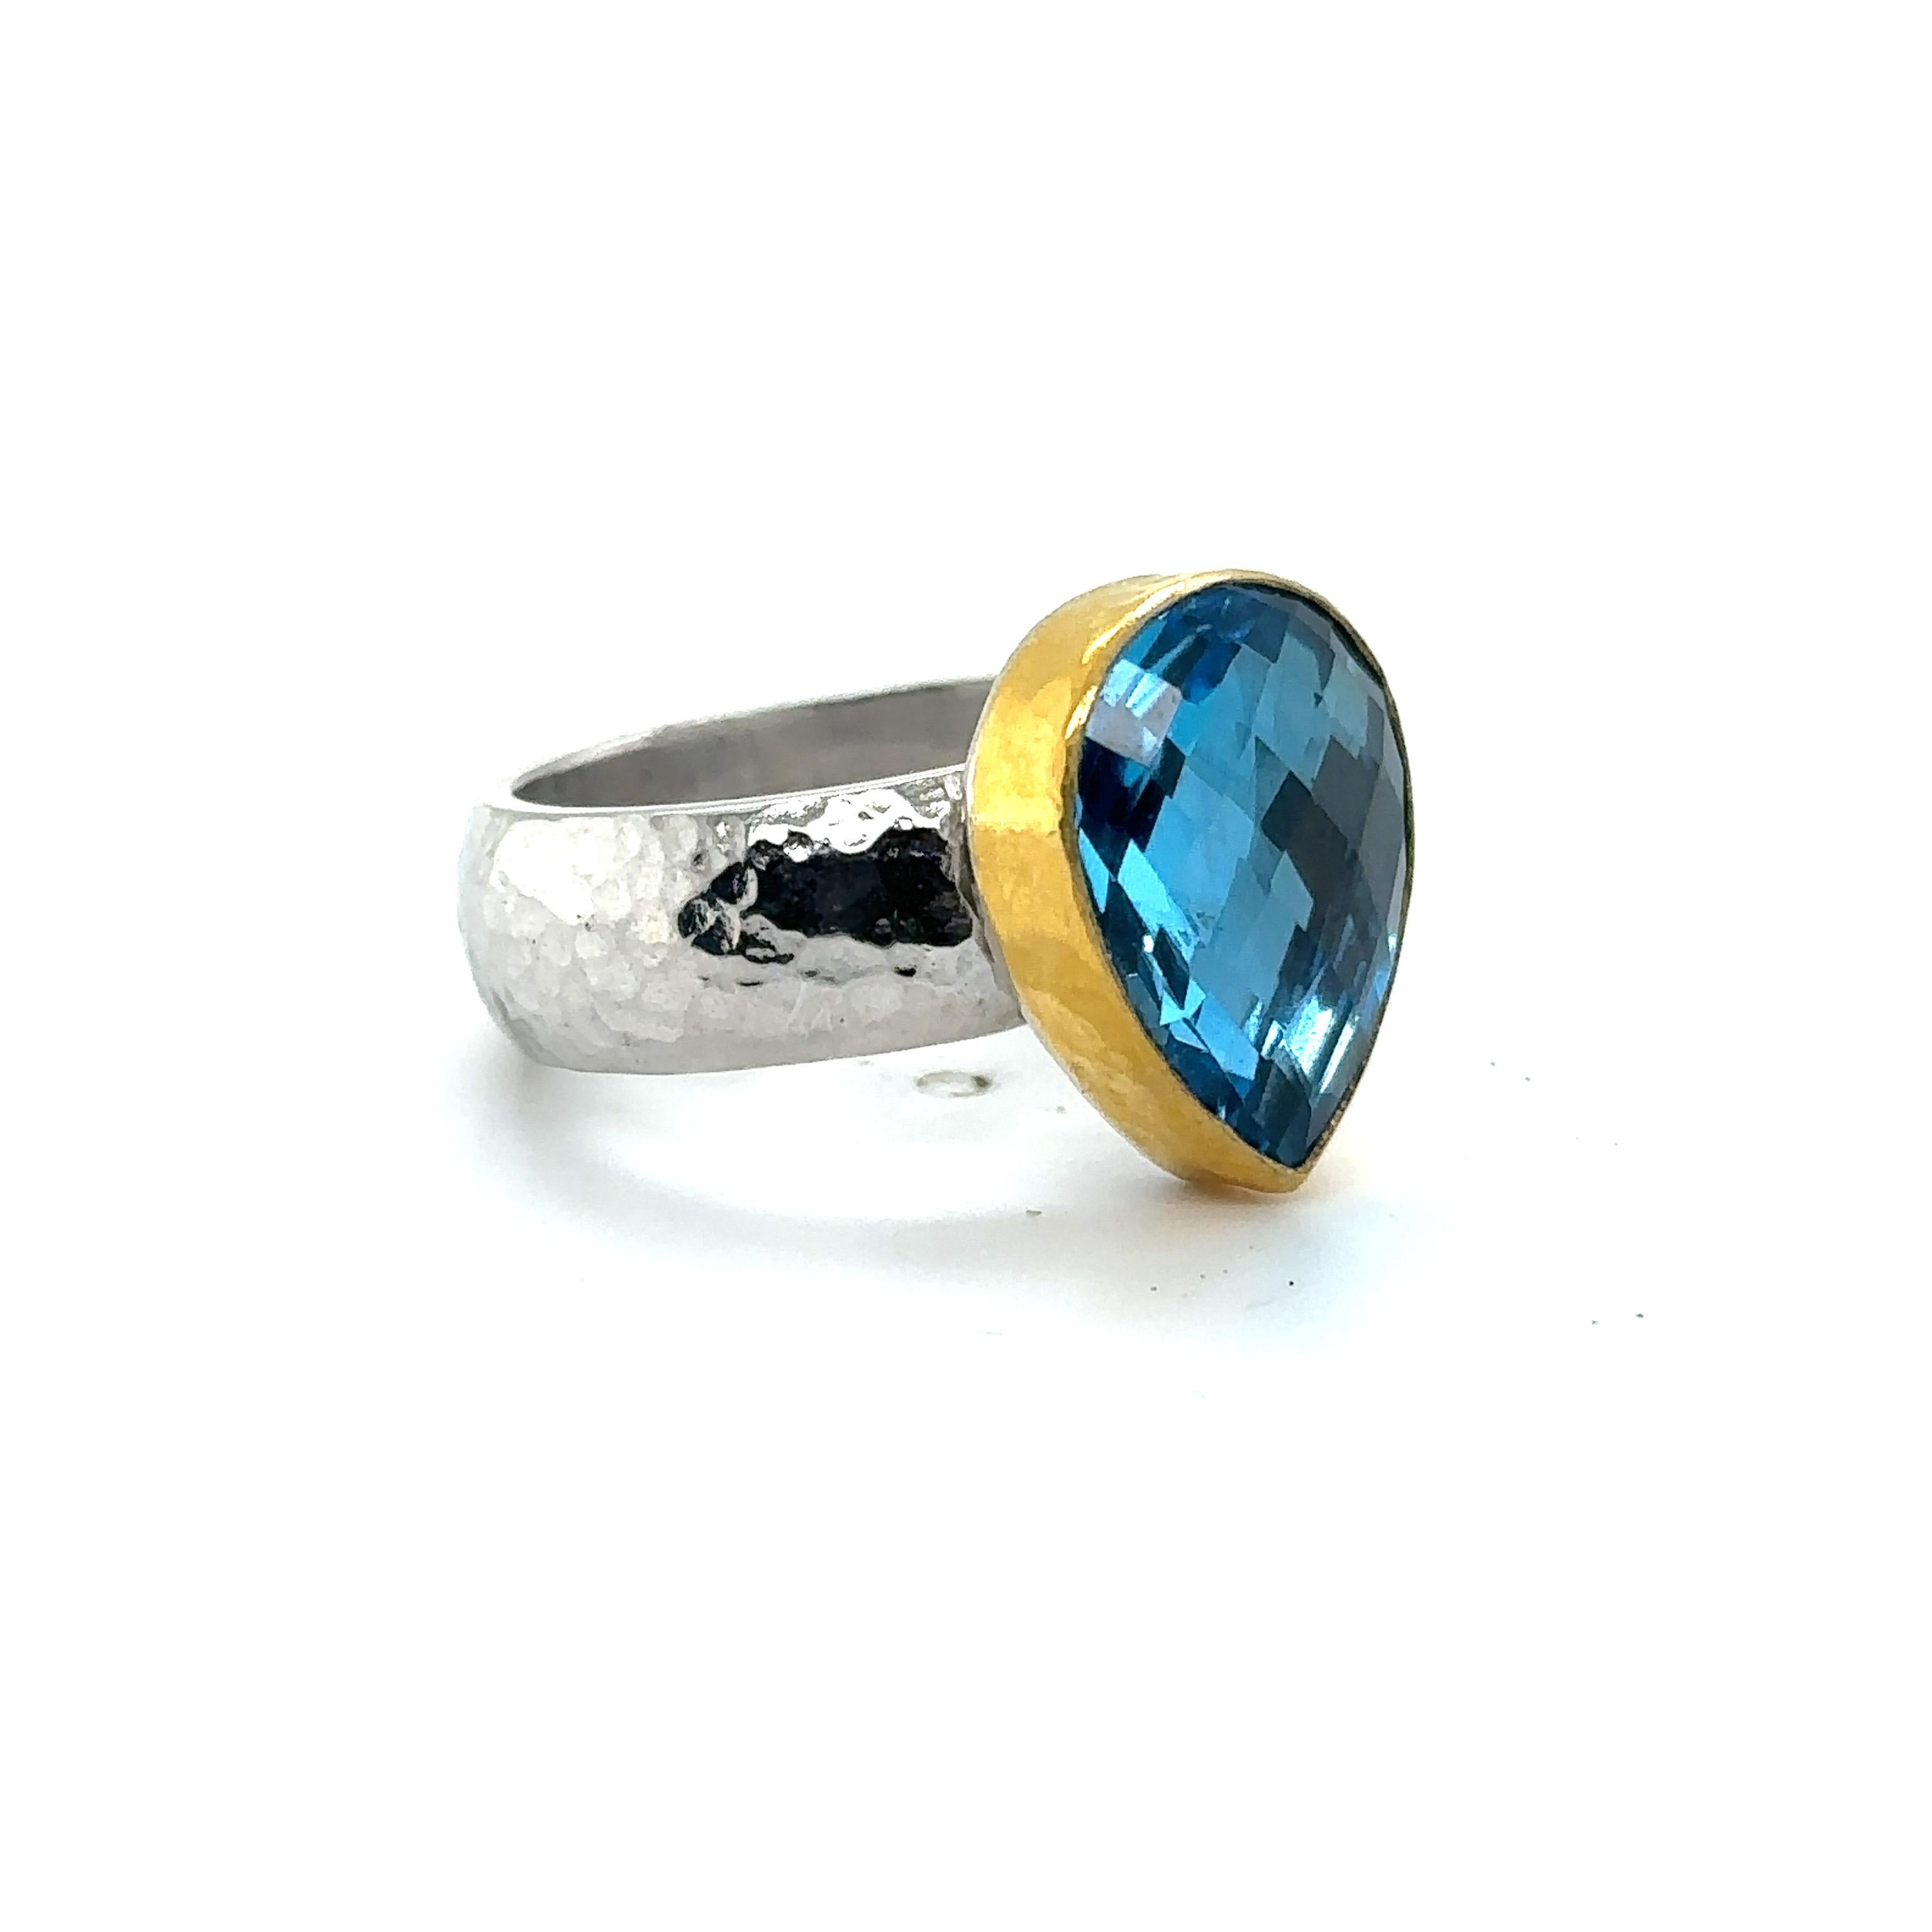 JAS-19-1918 - 24KT GOLD/SS RING with PEAR SHAPE SWISS BLUE TOPAZ In New Condition For Sale In New York, NY